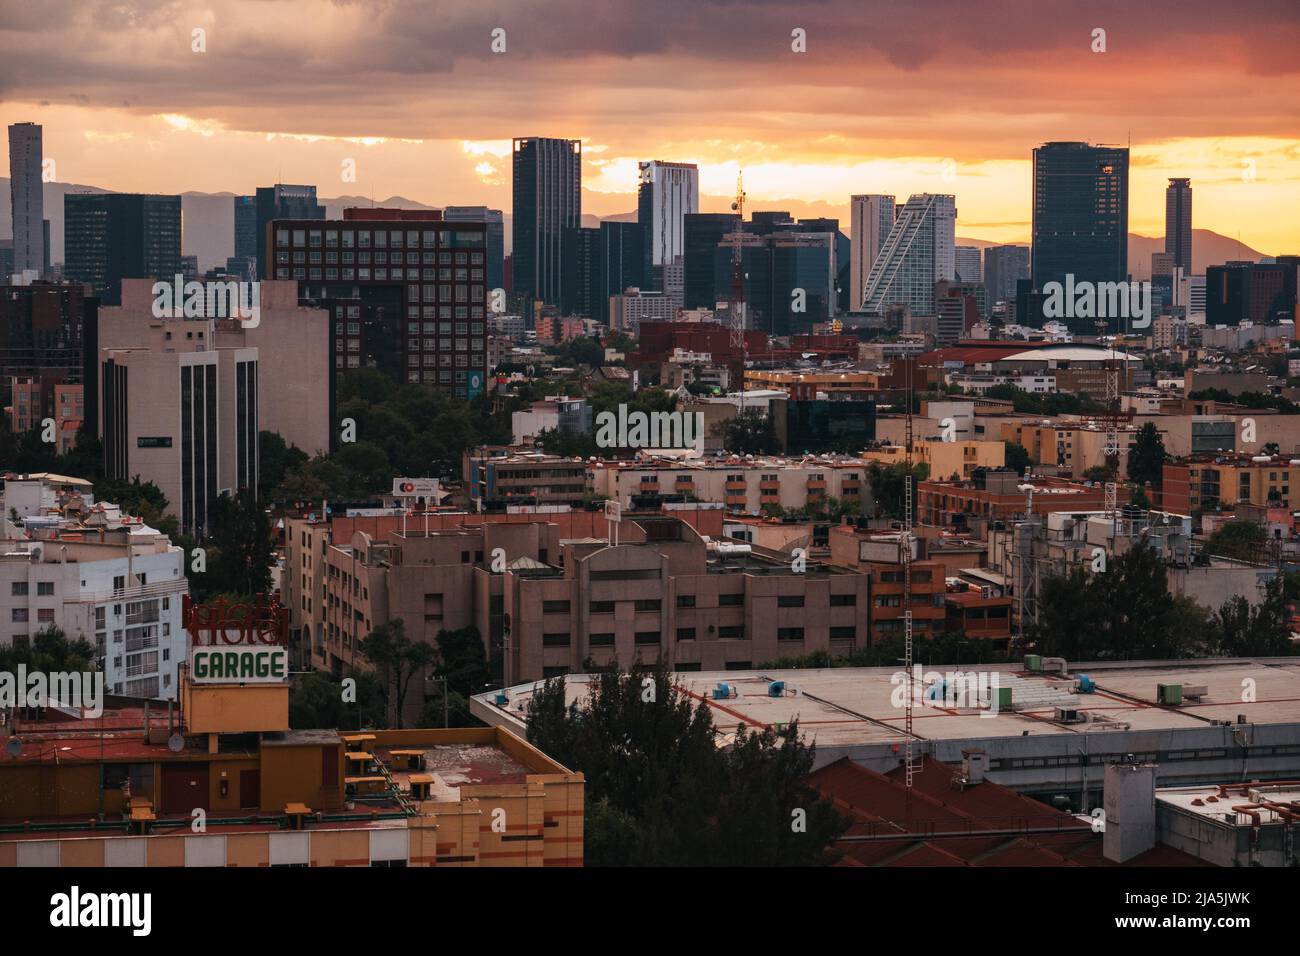 A dramatic and fiery sunset over the skyline of Mexico City, Mexico Stock Photo